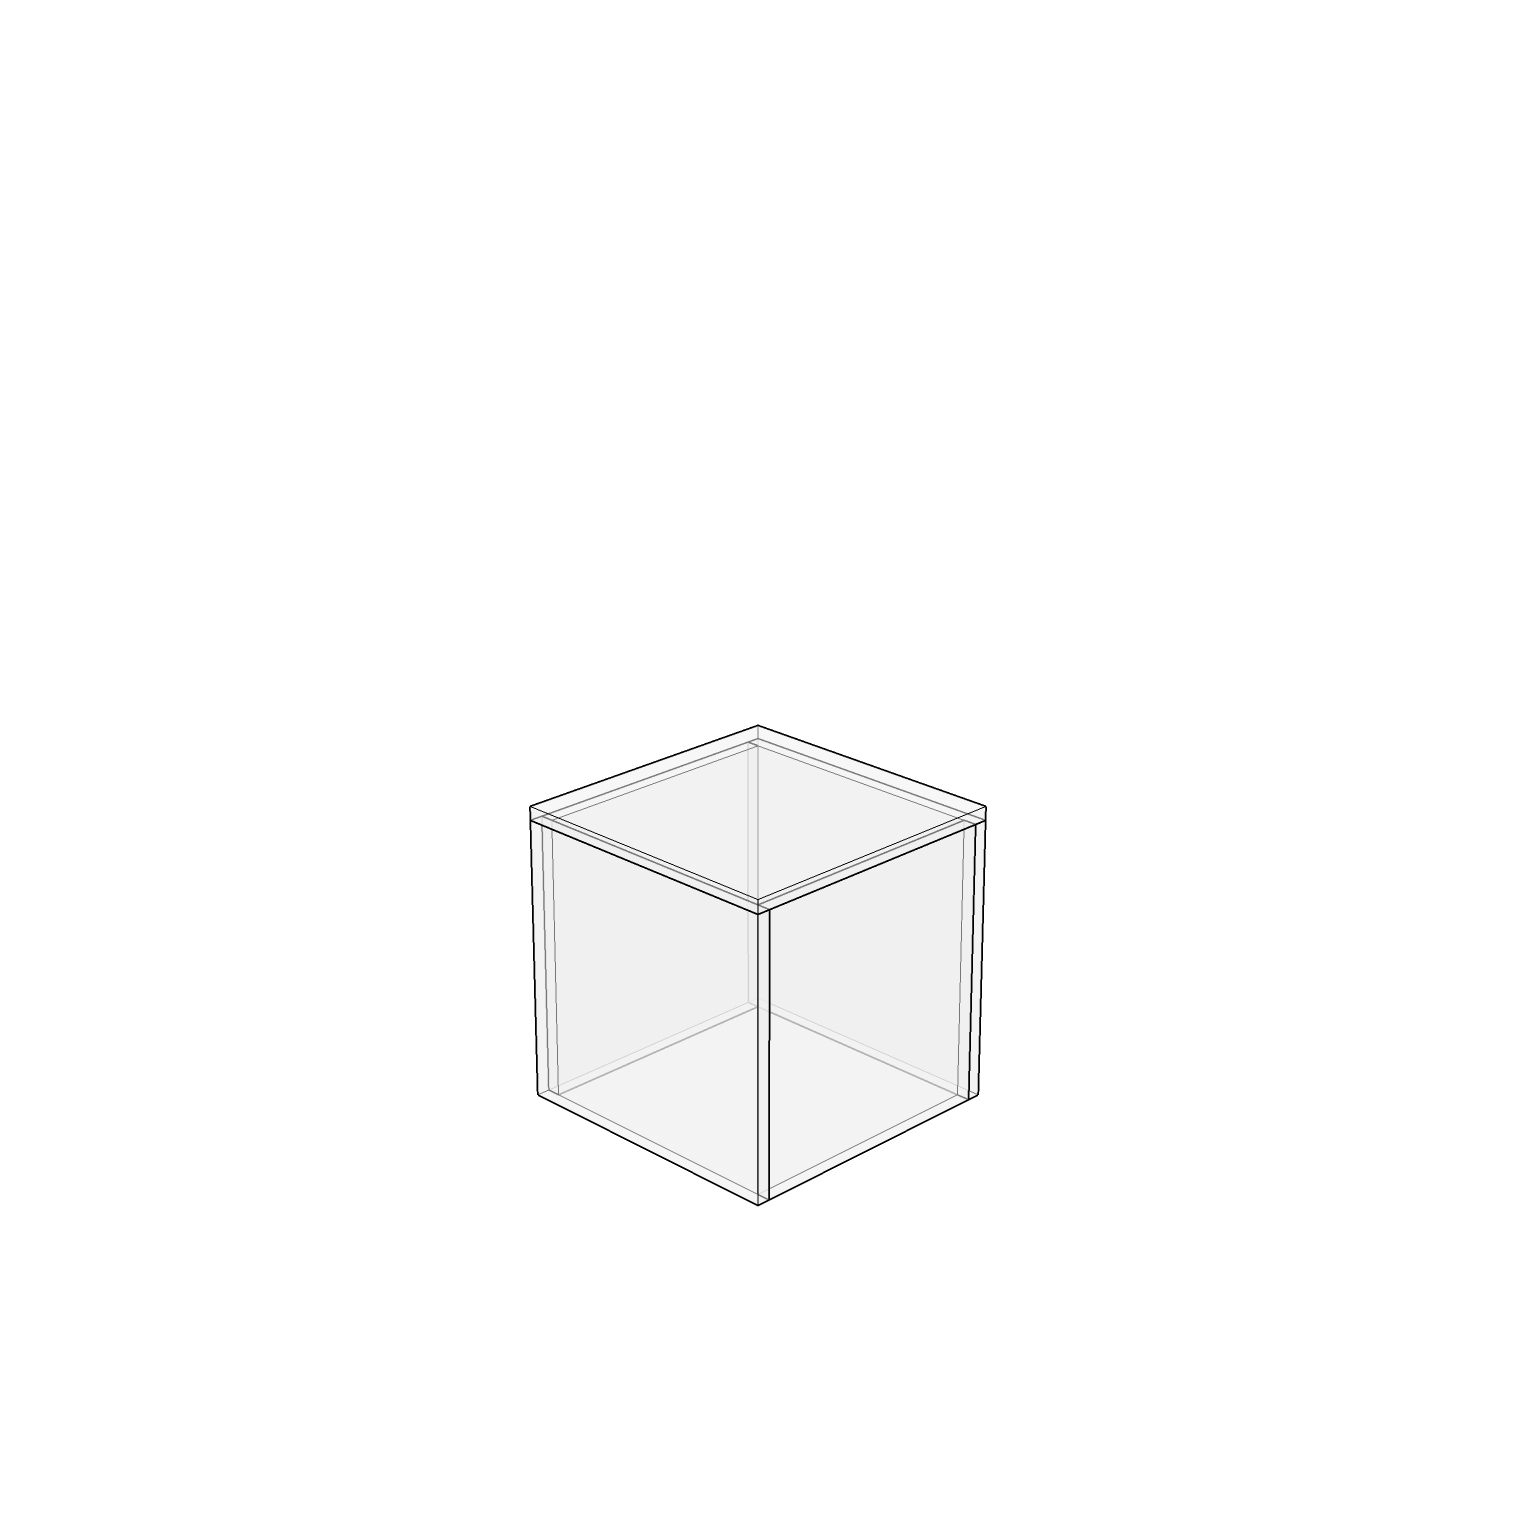 5 Sided Cube 4" Square 3/16" Thick